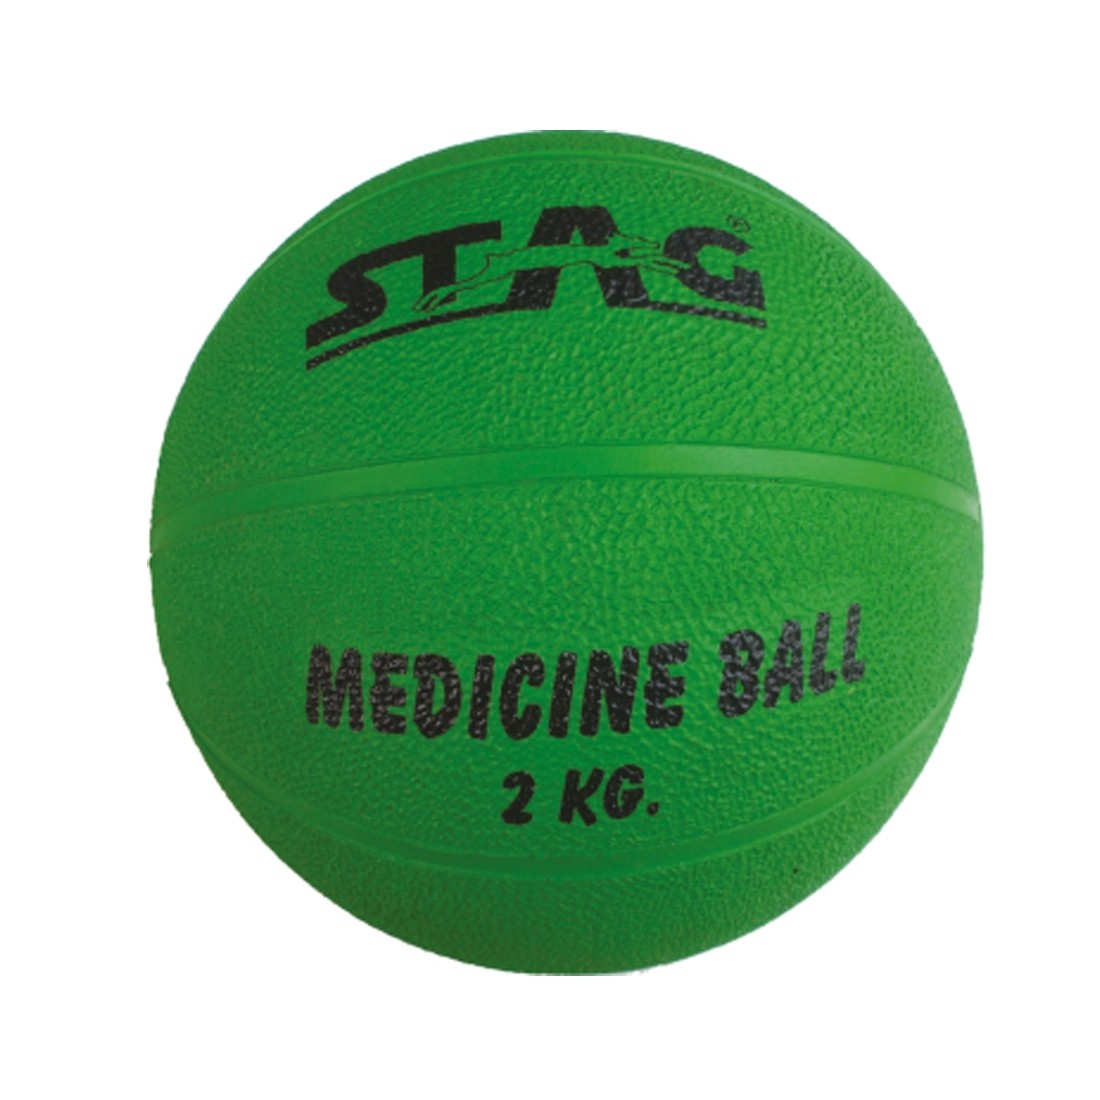 STAG MEDICINE BOUNCING GYM BALL RUBBER INFLATABLE 1KG